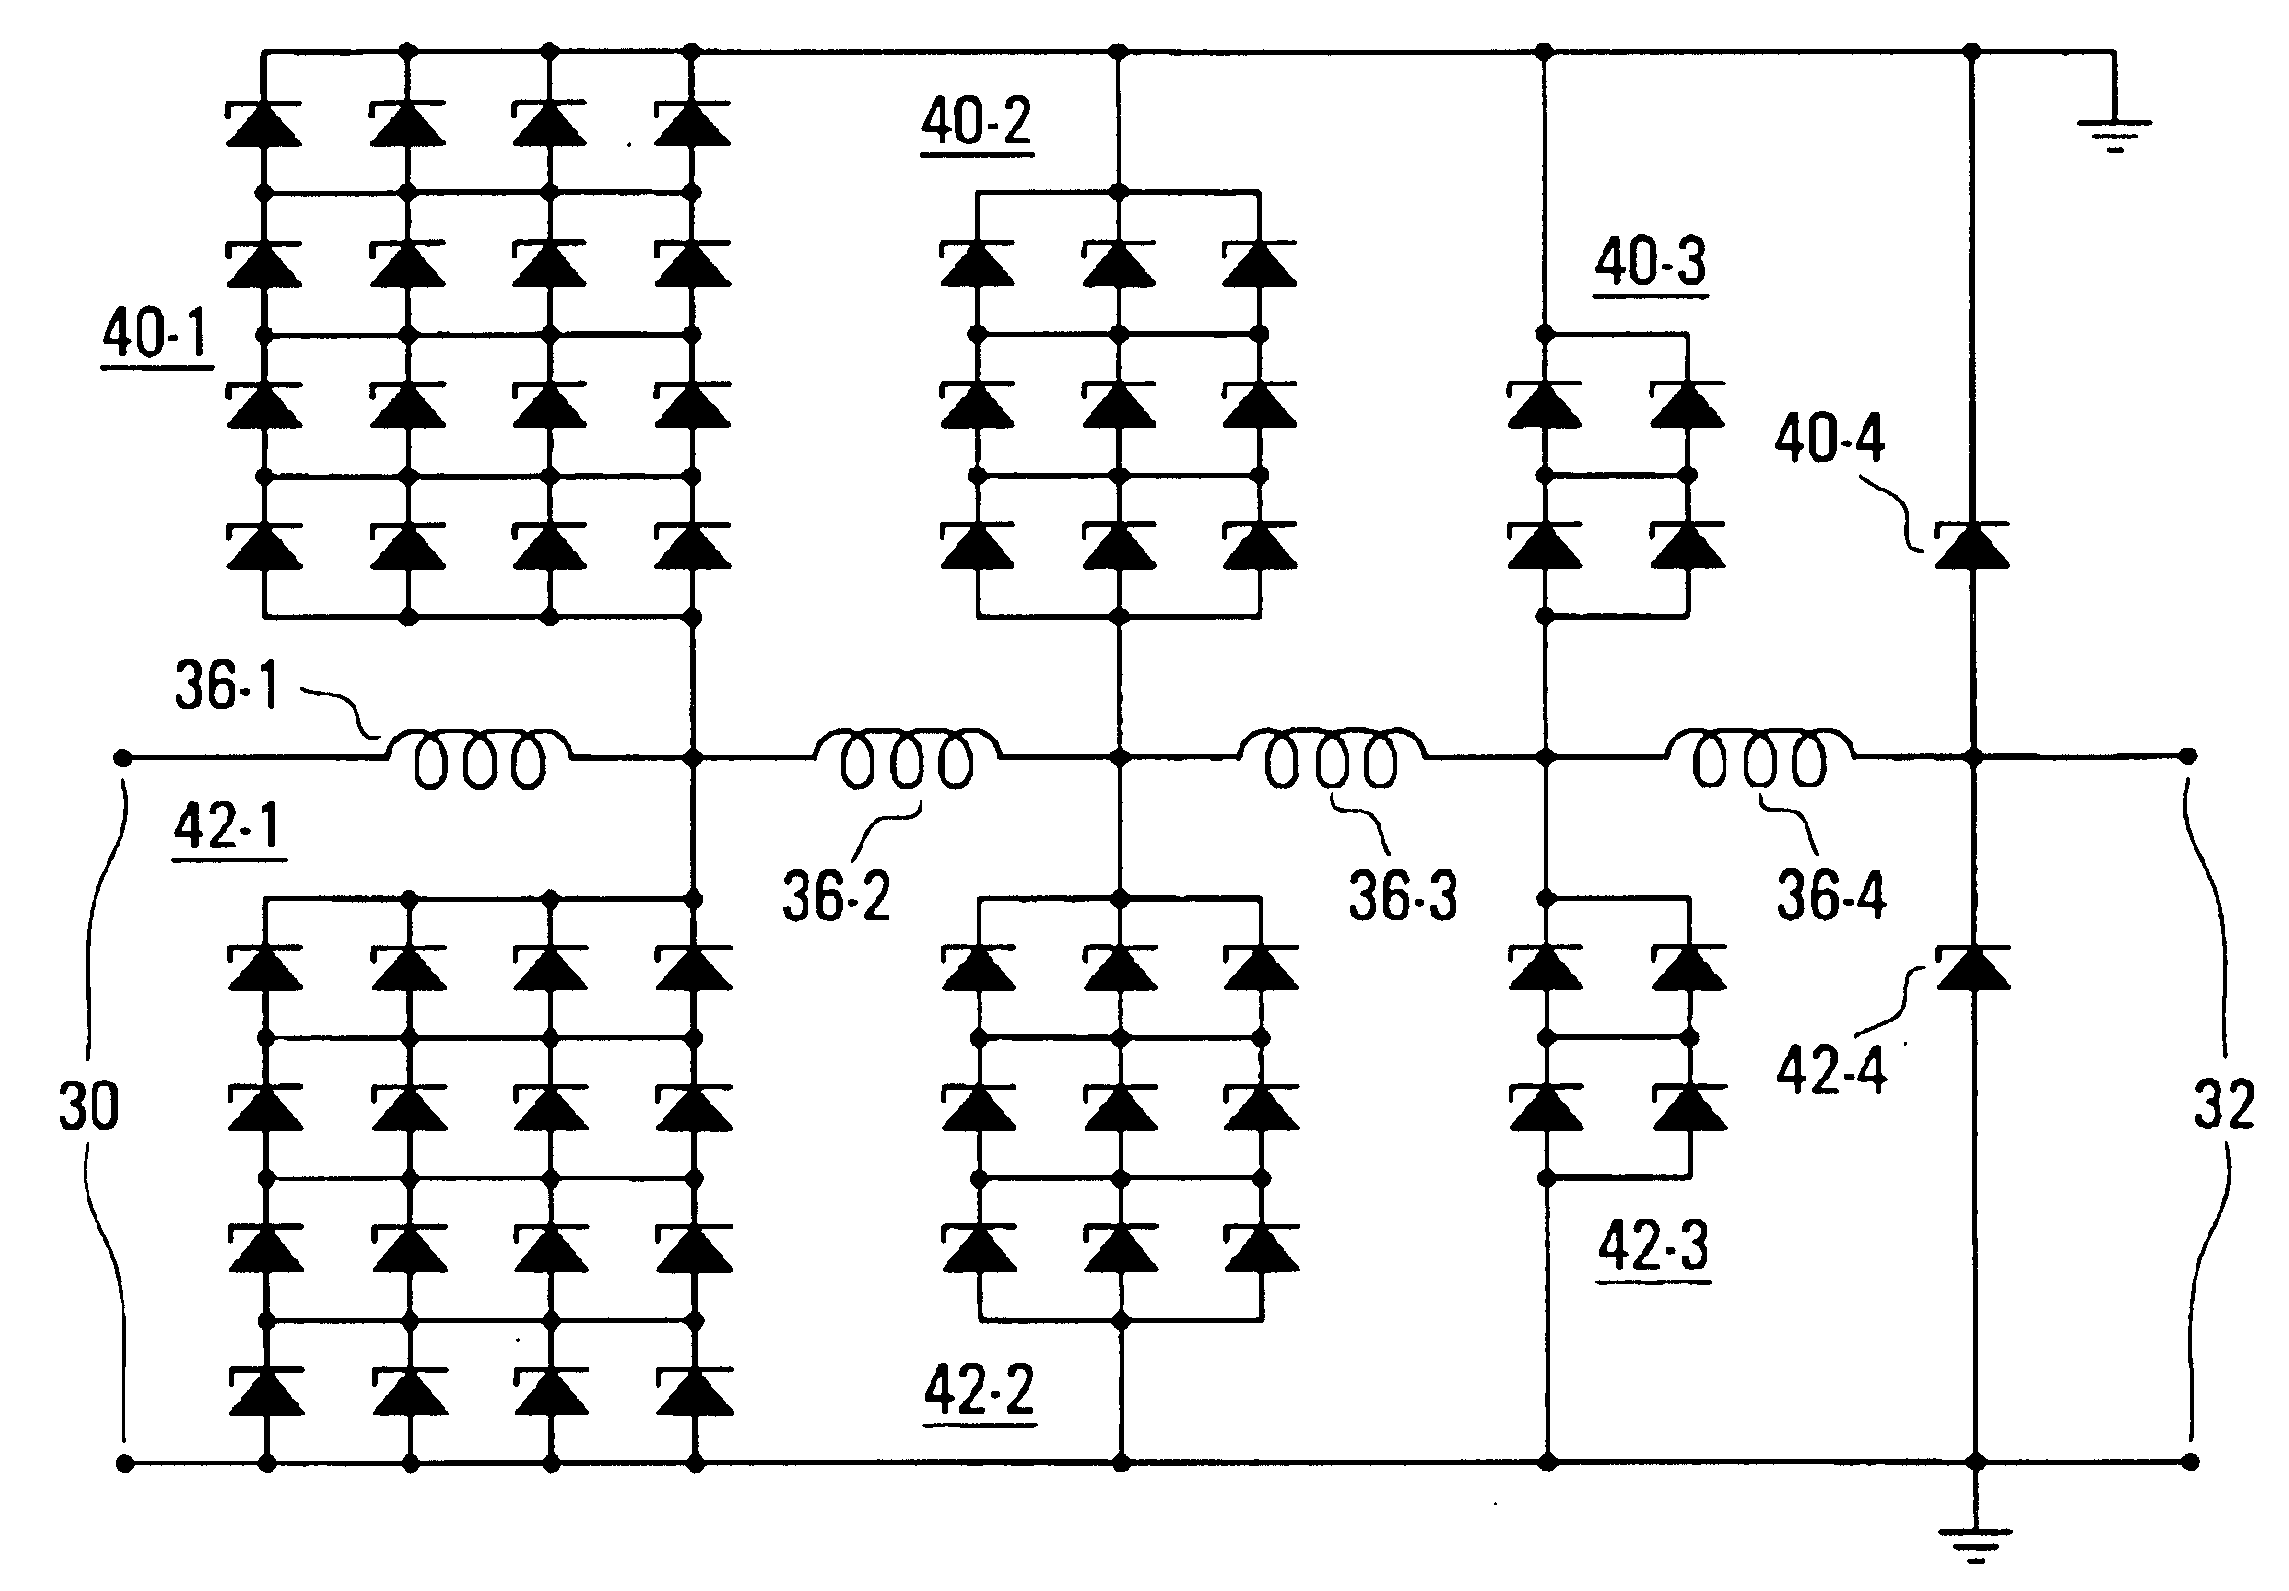 Input power limiter for a microwave receiver